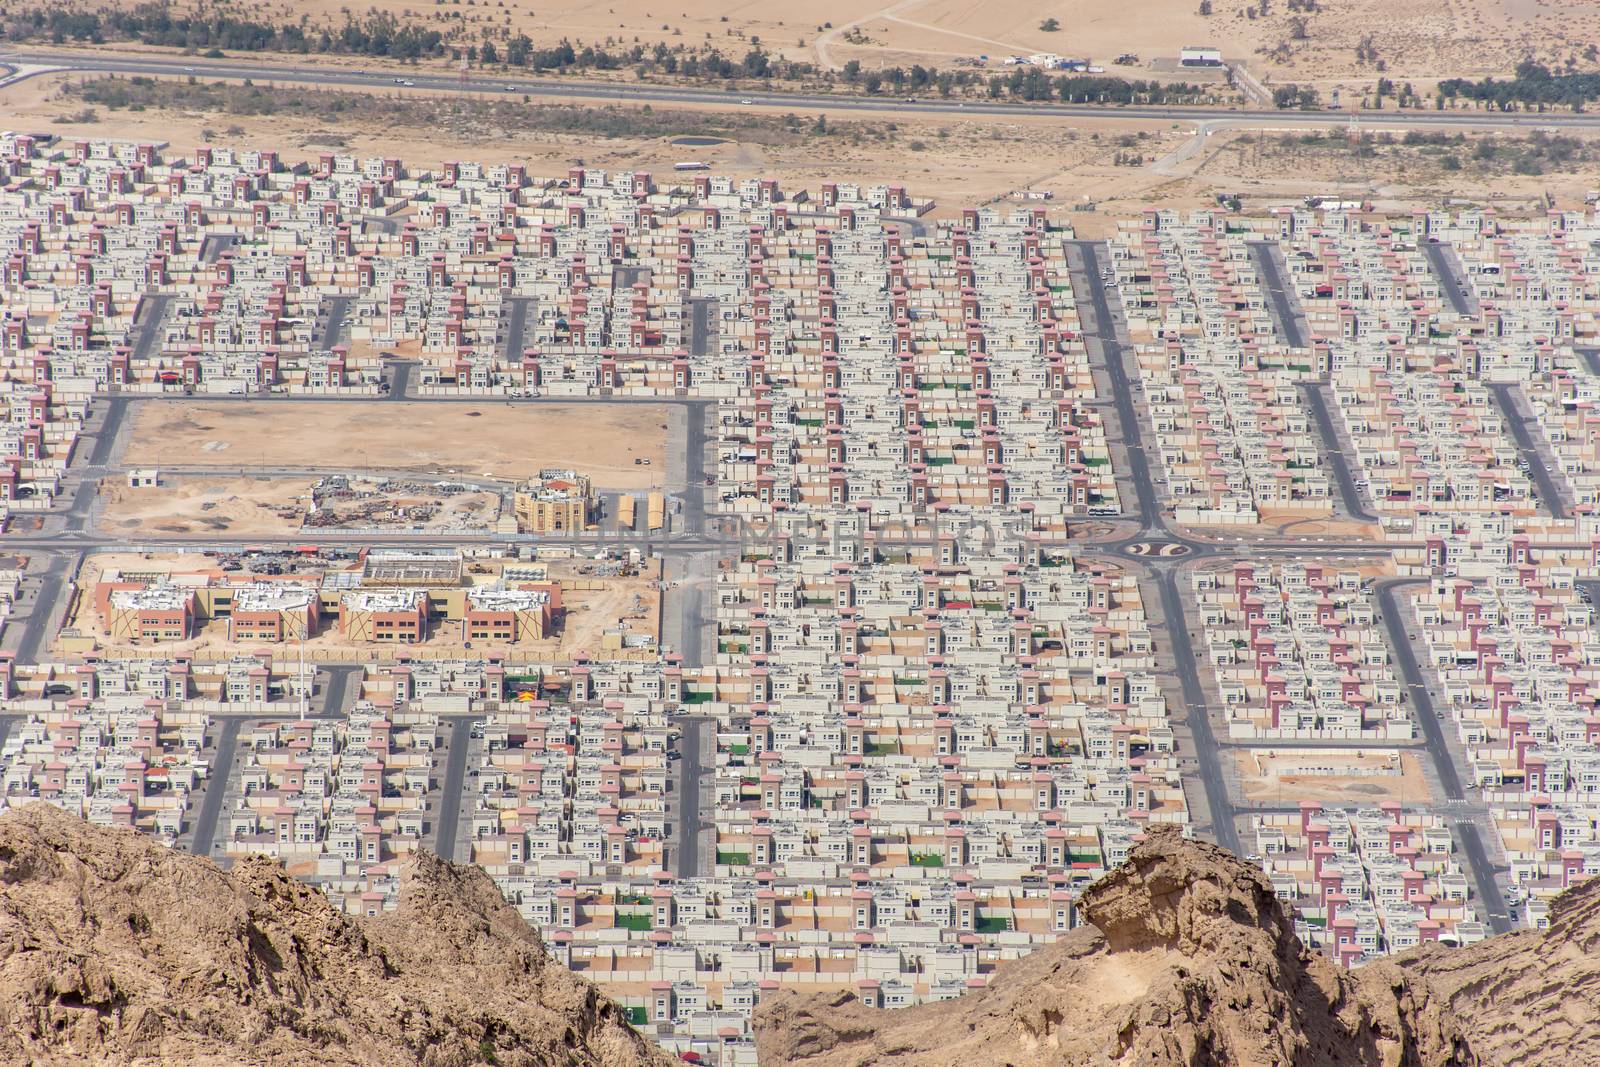 Aerial view of New housing development in Al Ain, Abu Dhabi, United Arab Emirates from Jebal Hafeet mountain top looking at common or same housing design.